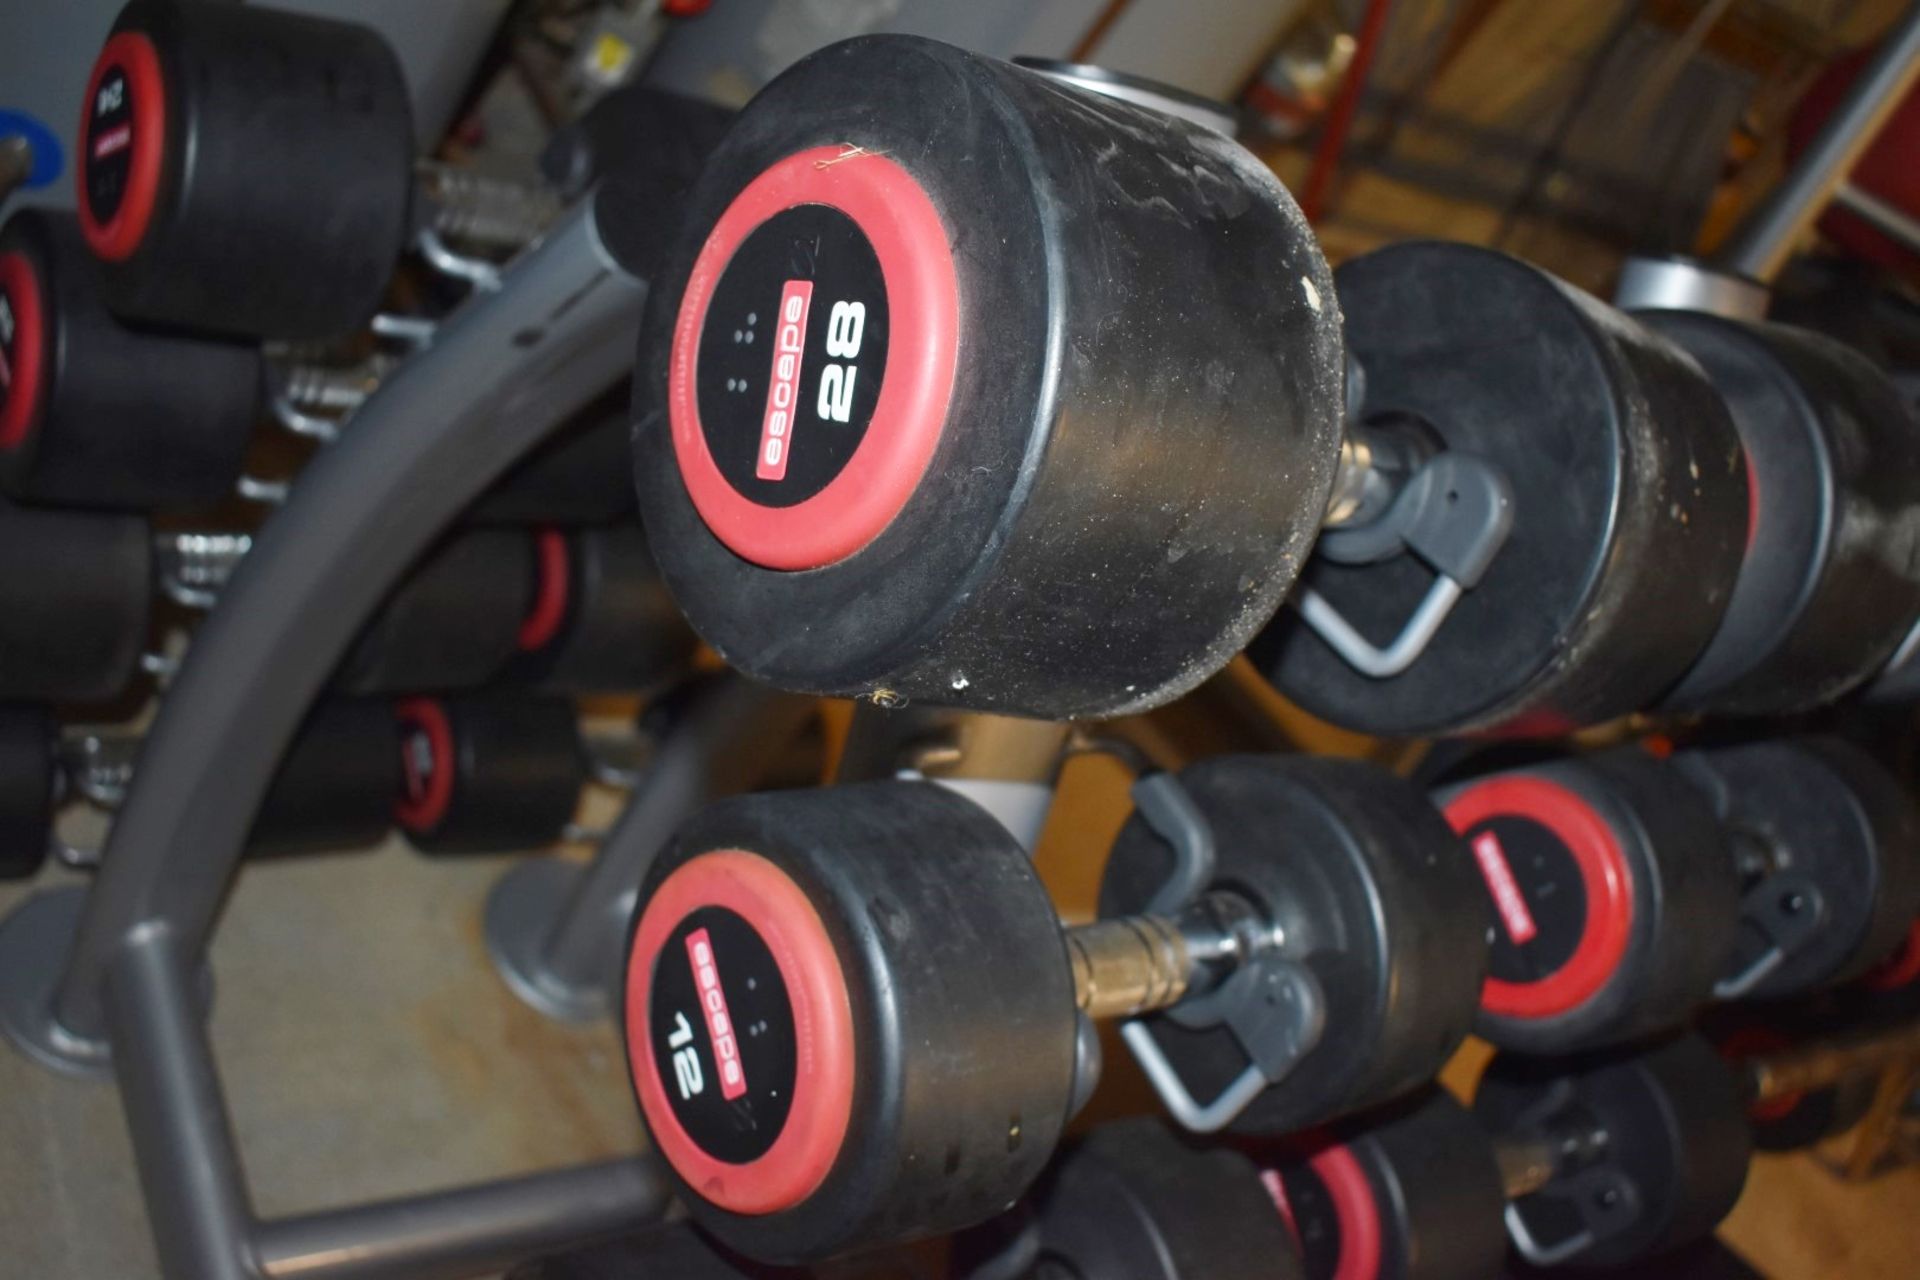 18 x Escape Polyurethane Dumbell Weights - Includes 8kg to 30kg Dumbells and Rubber Dumrbell - Image 4 of 7